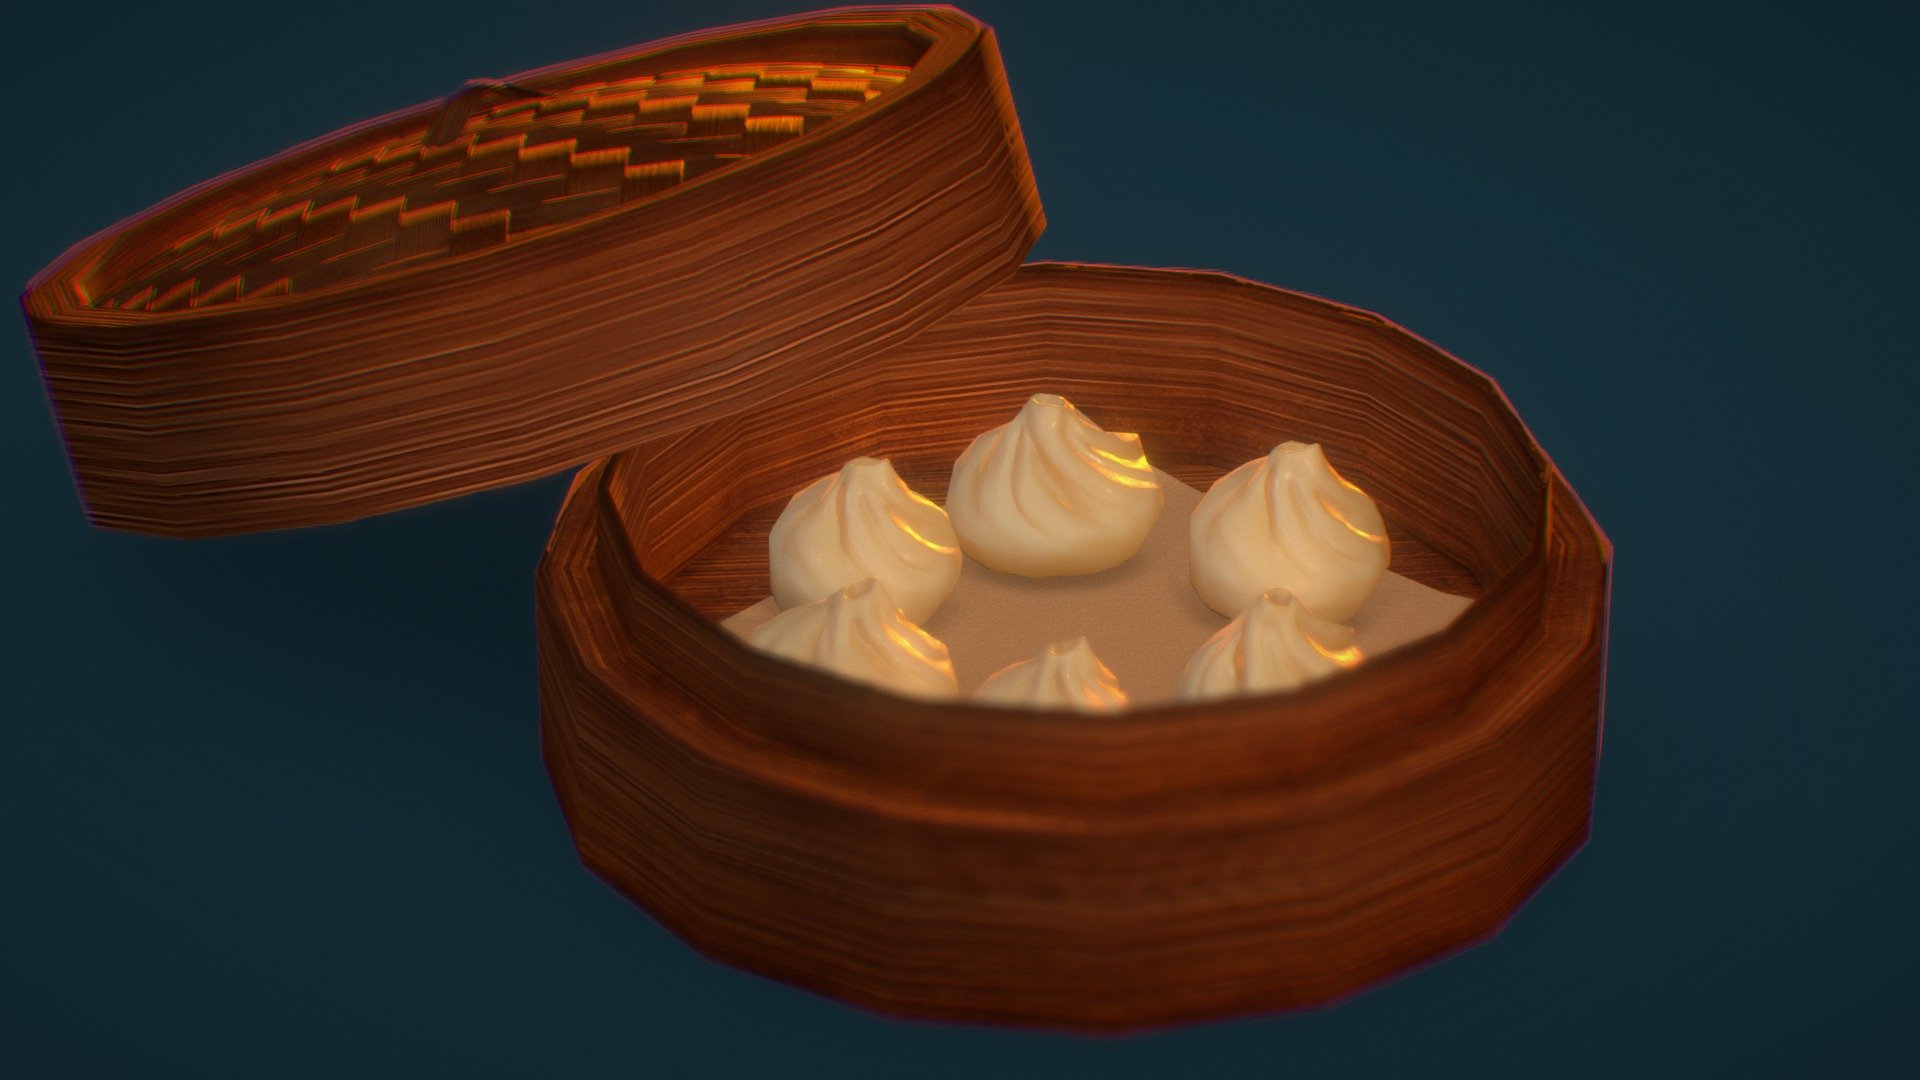 Small fun test to try different things in materials and rendering :) - Dimsum Dumplings - 3D model by Sam Baqvel (@Sambqvl) 3d model